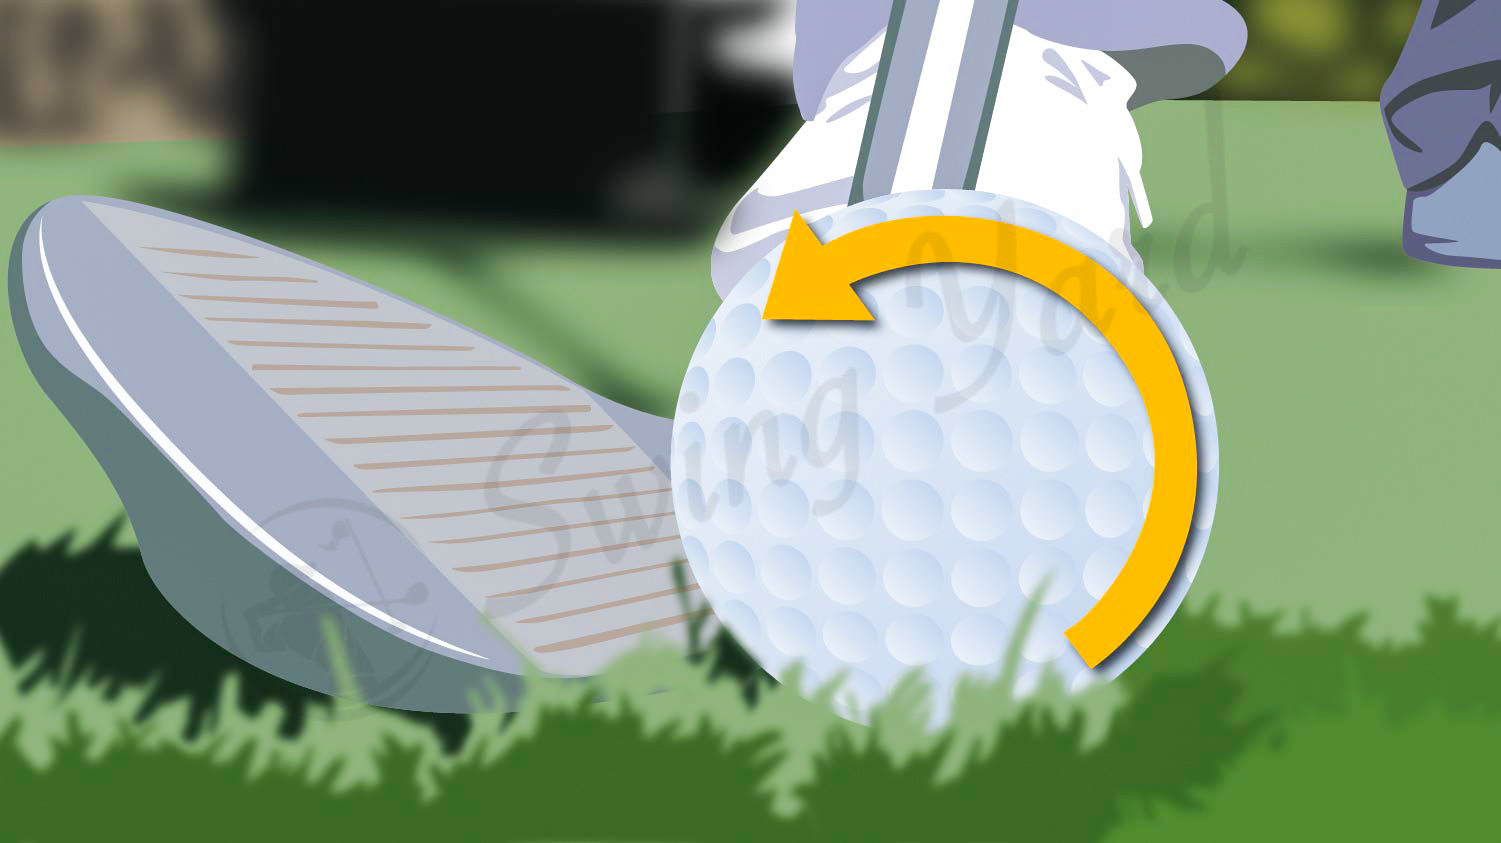 The best golf balls have good short game spin